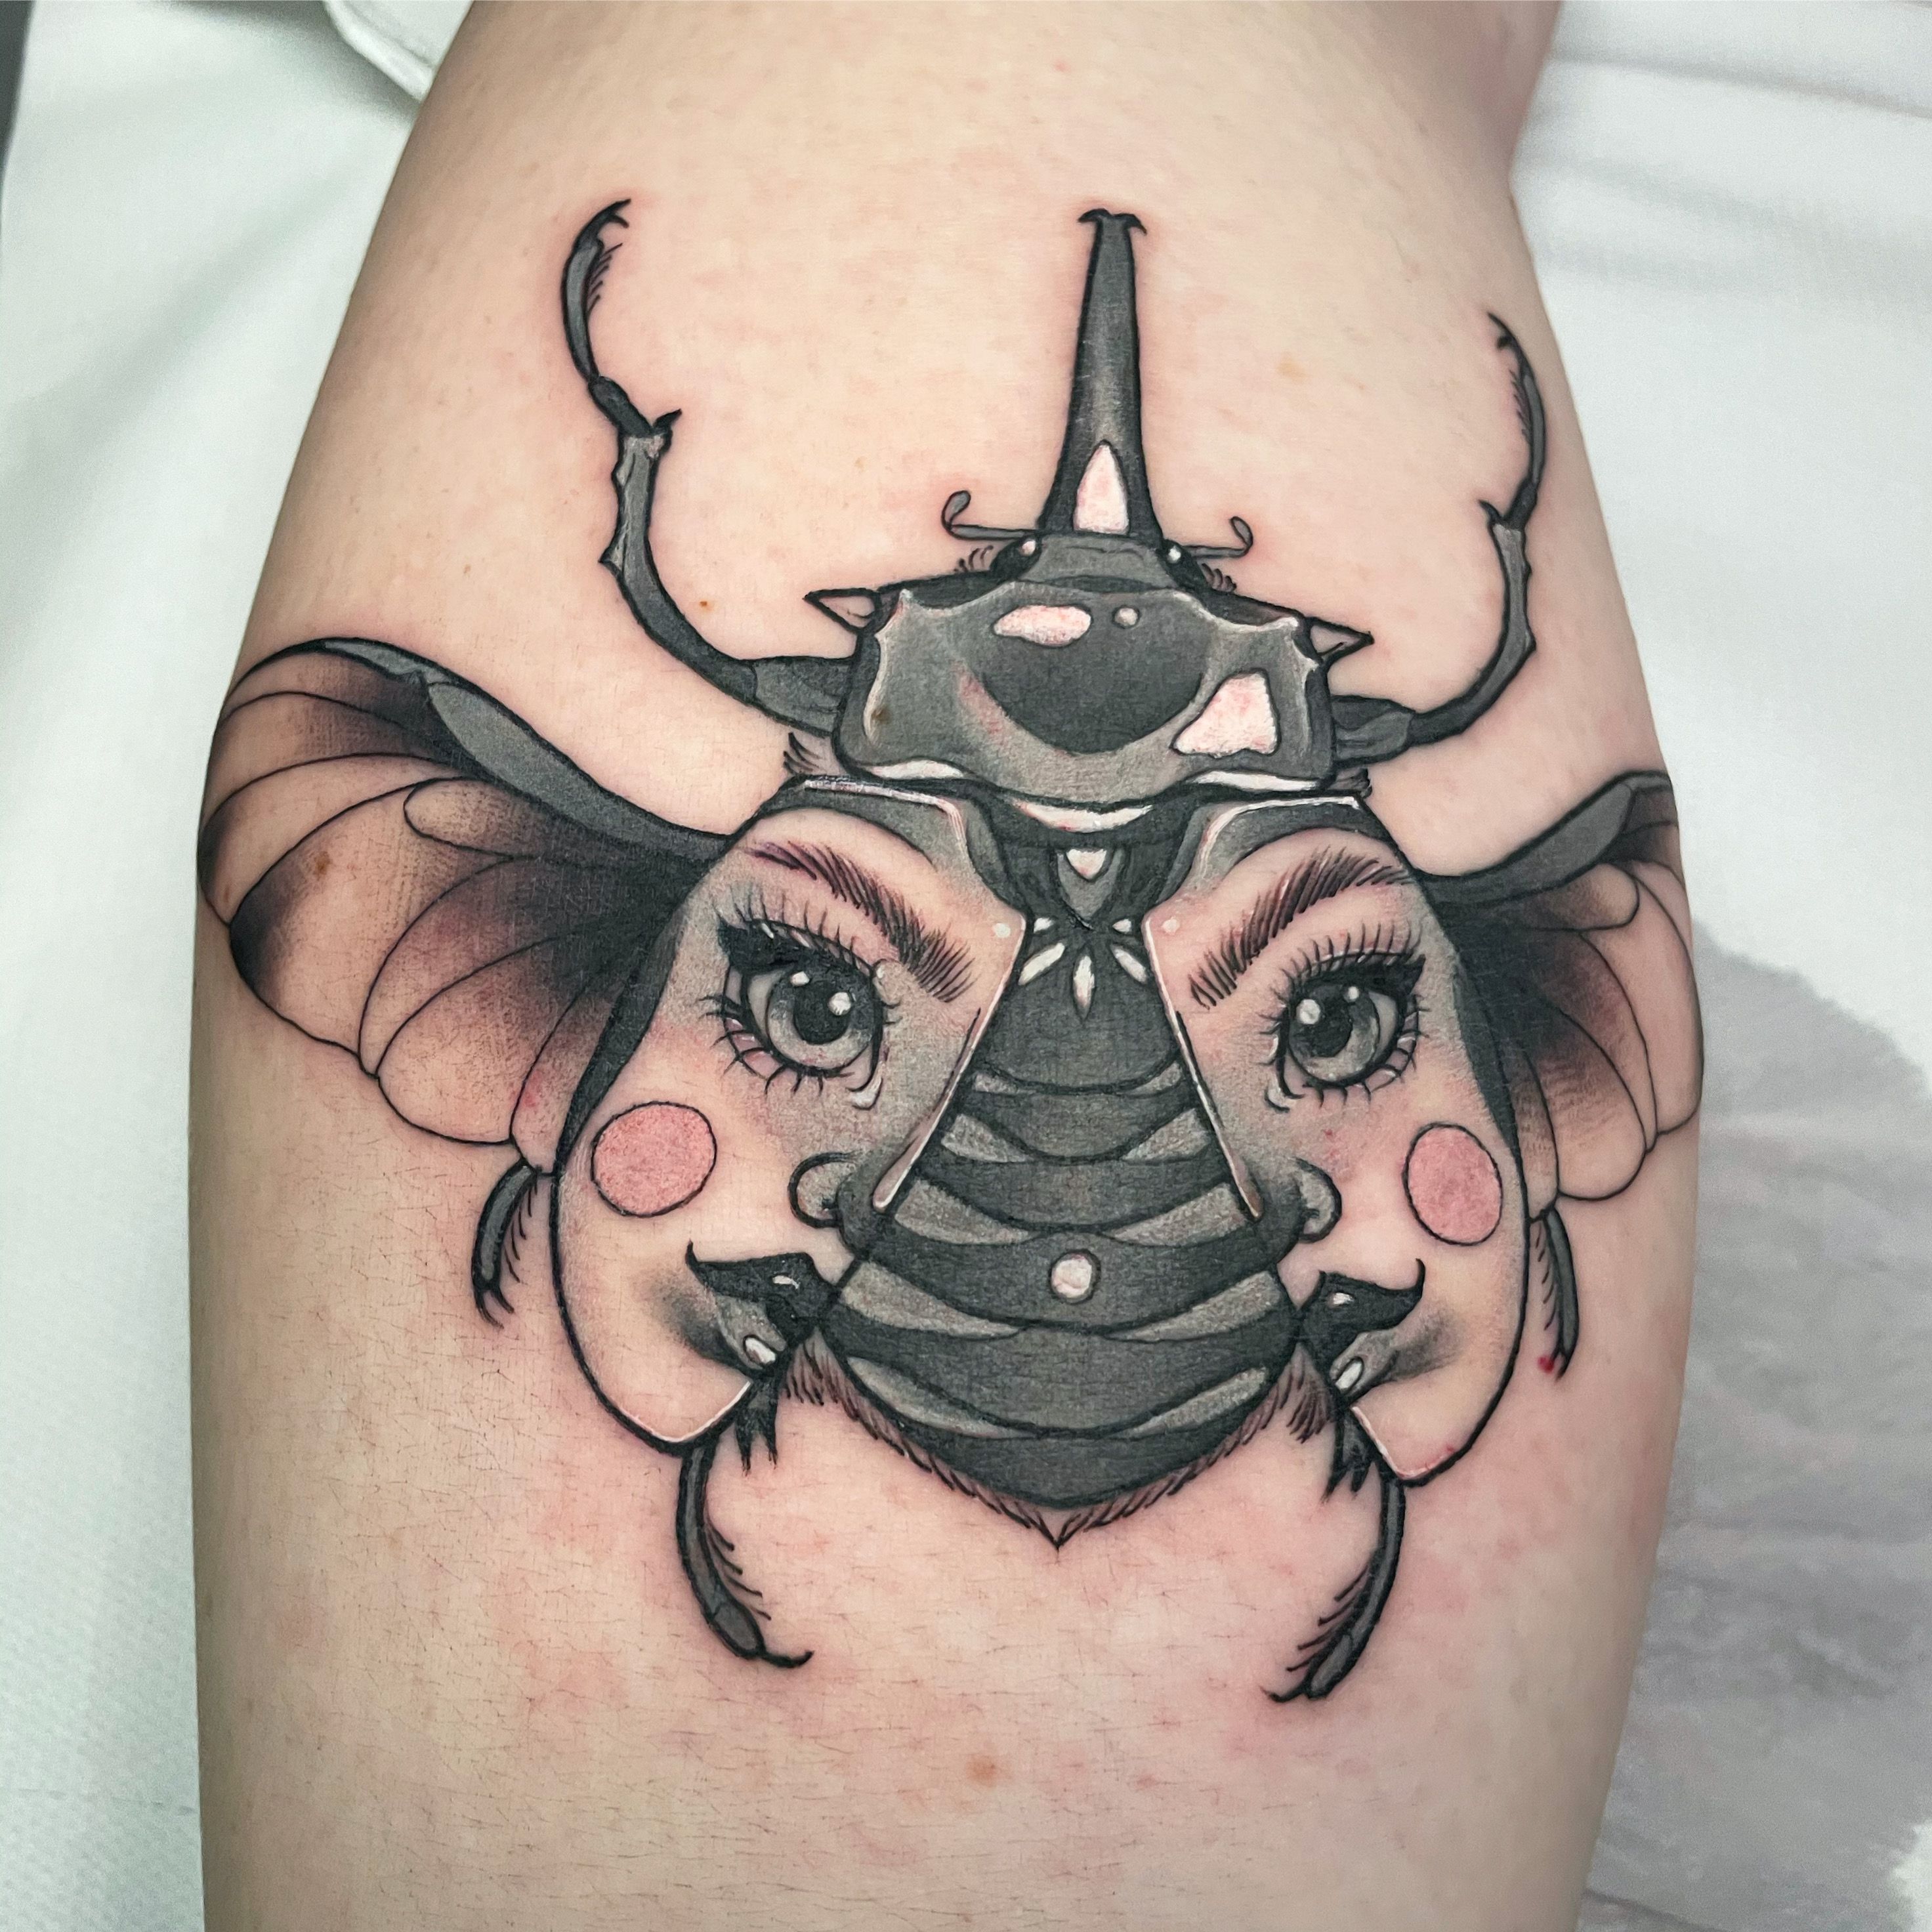 Bettle tattoo located on the upper arm.